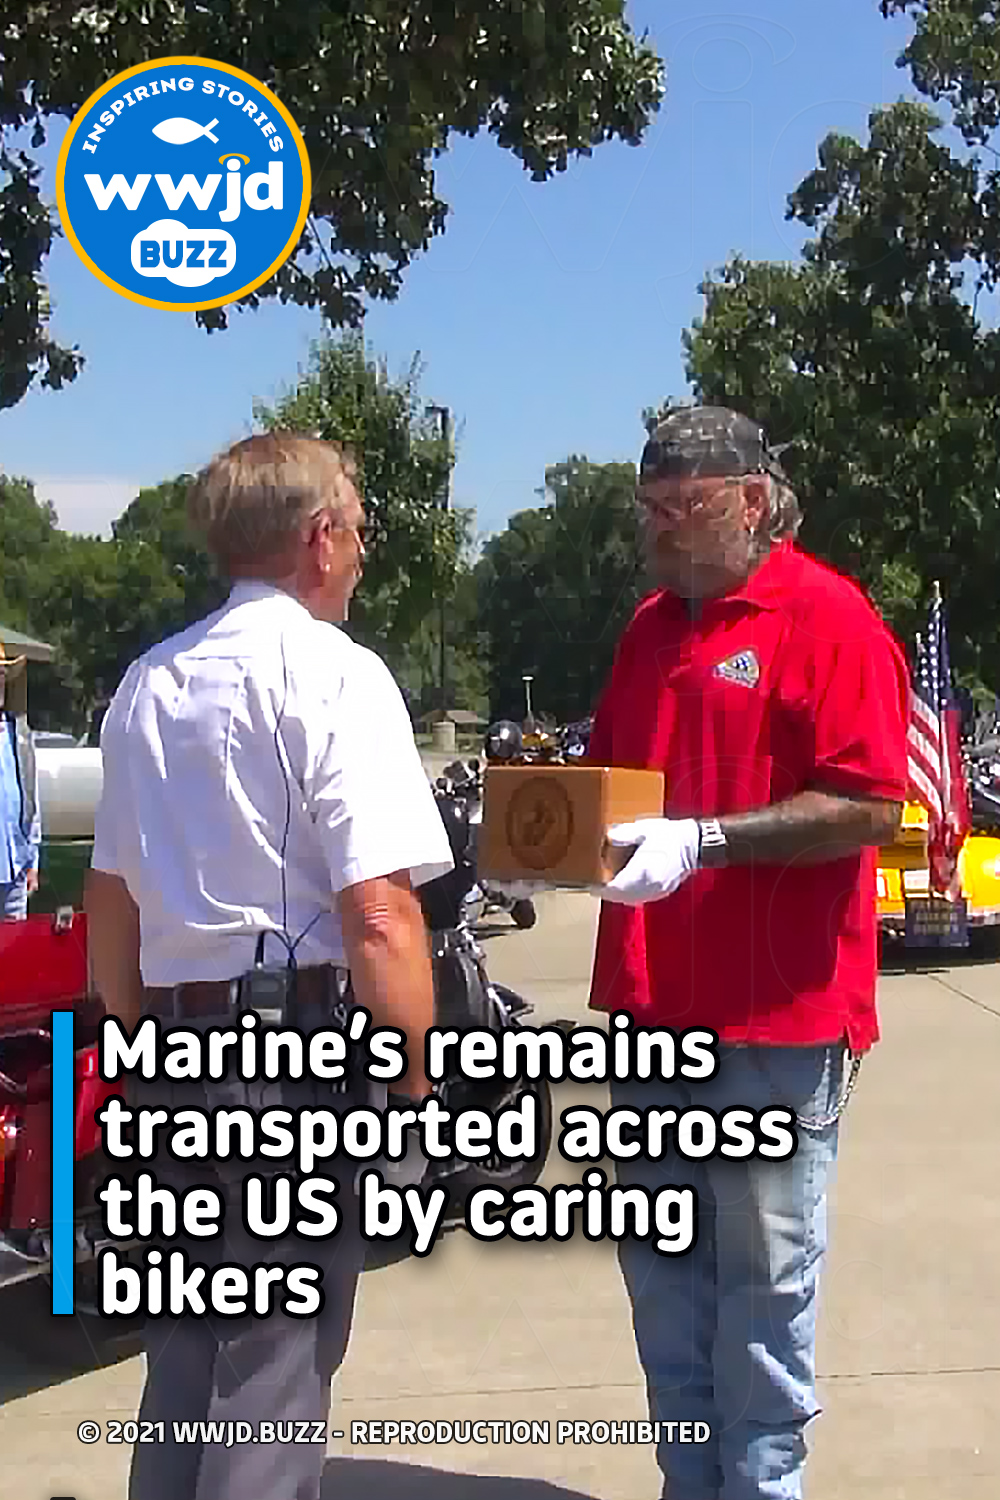 Marine’s remains transported across the US by caring bikers